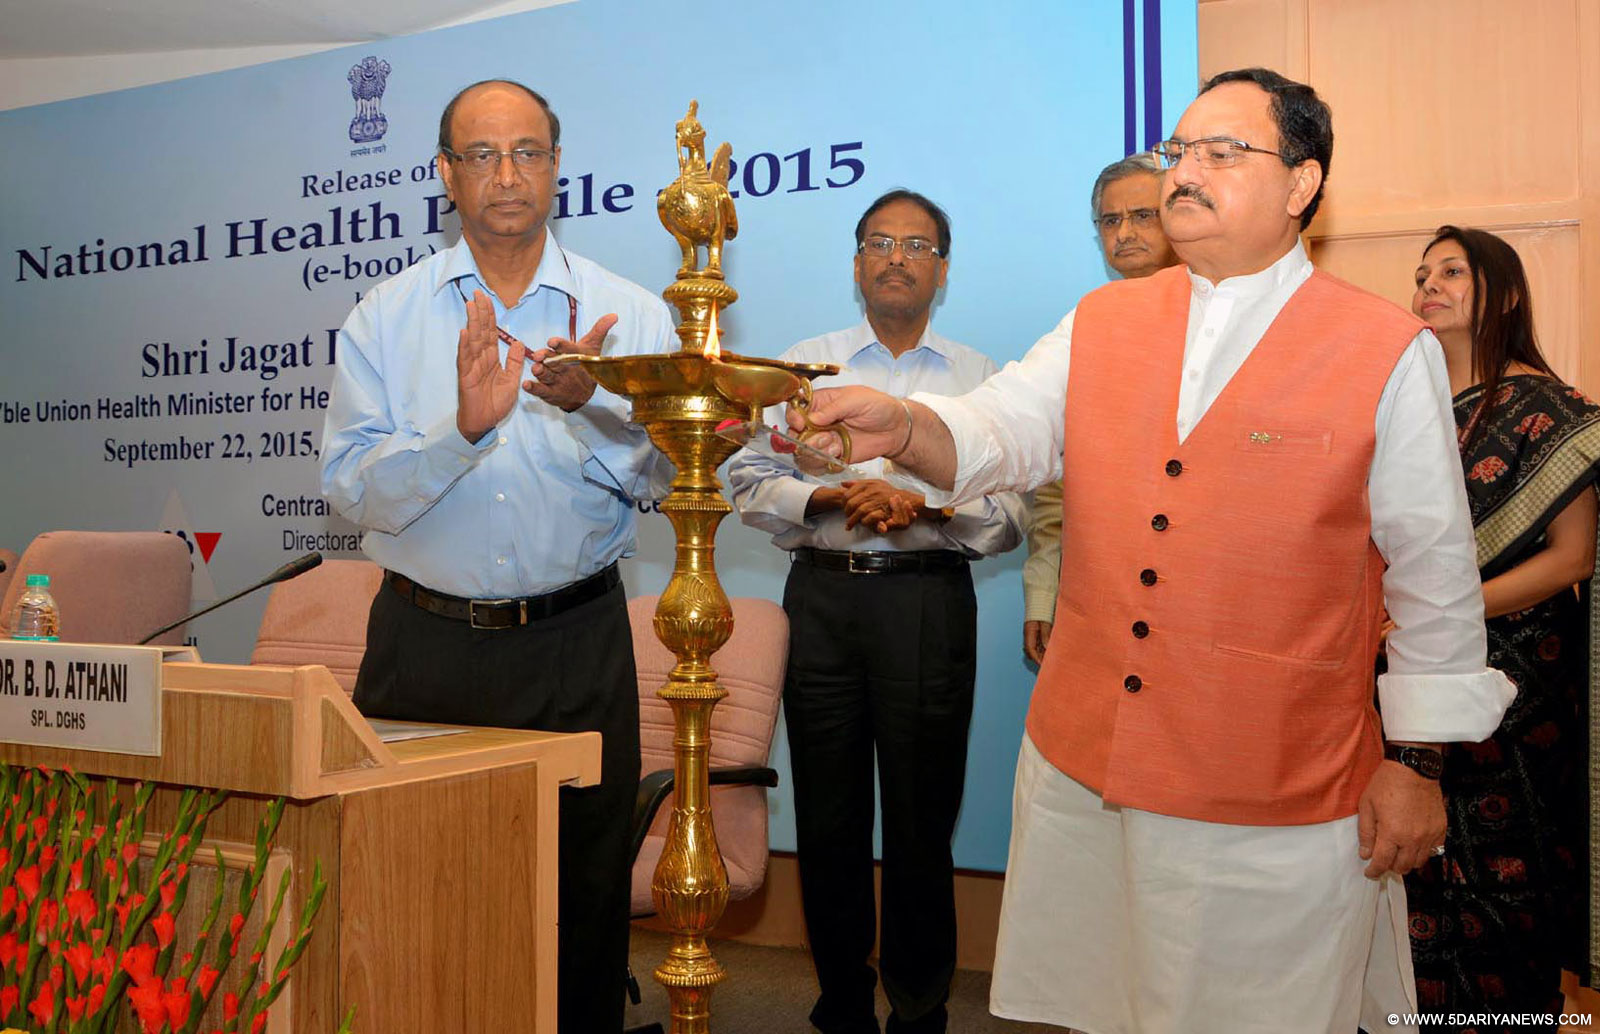 The Union Minister for Health & Family Welfare, Shri J.P. Nadda lighting the lamp at the release ceremony of the “National Health Profile-2015”, published by the Central Bureau of Health Intelligence (CBHI), in New Delhi on September 22, 2015. The secretary, Ministry of Health and Family Welfare, Shri B.P. Sharma and the DGHS, Dr. (Prof.) Jagdish Prasad are also seen.